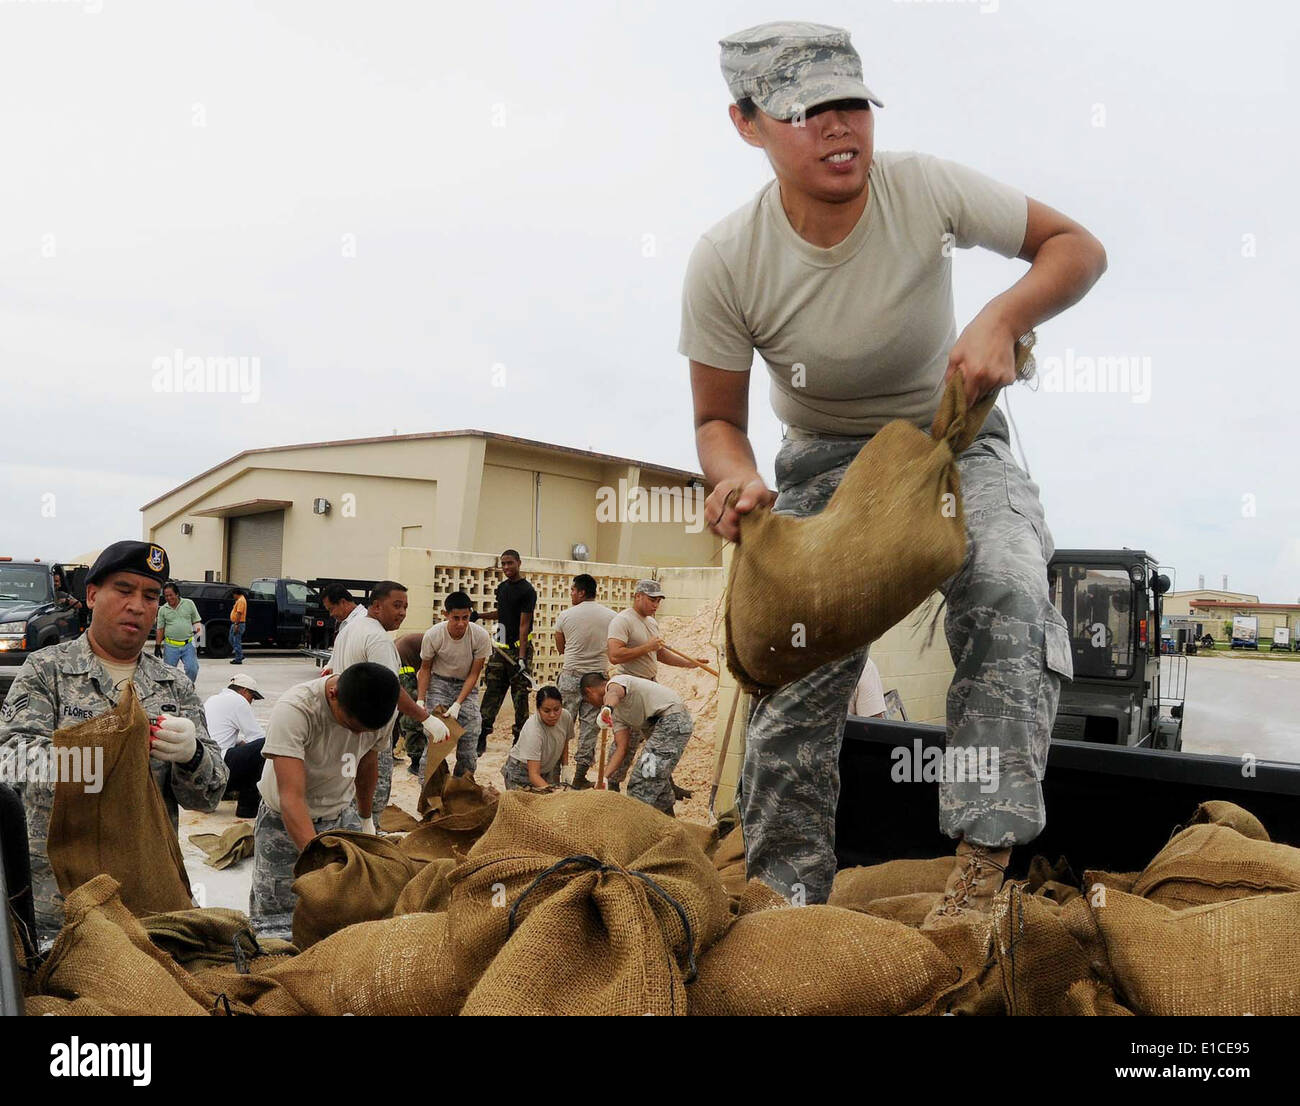 U.S. Air Force Airman 1st Class Jolene Muna, from the 254th Security Forces Squadron, Guam Air National Guard, loads sandbags o Stock Photo